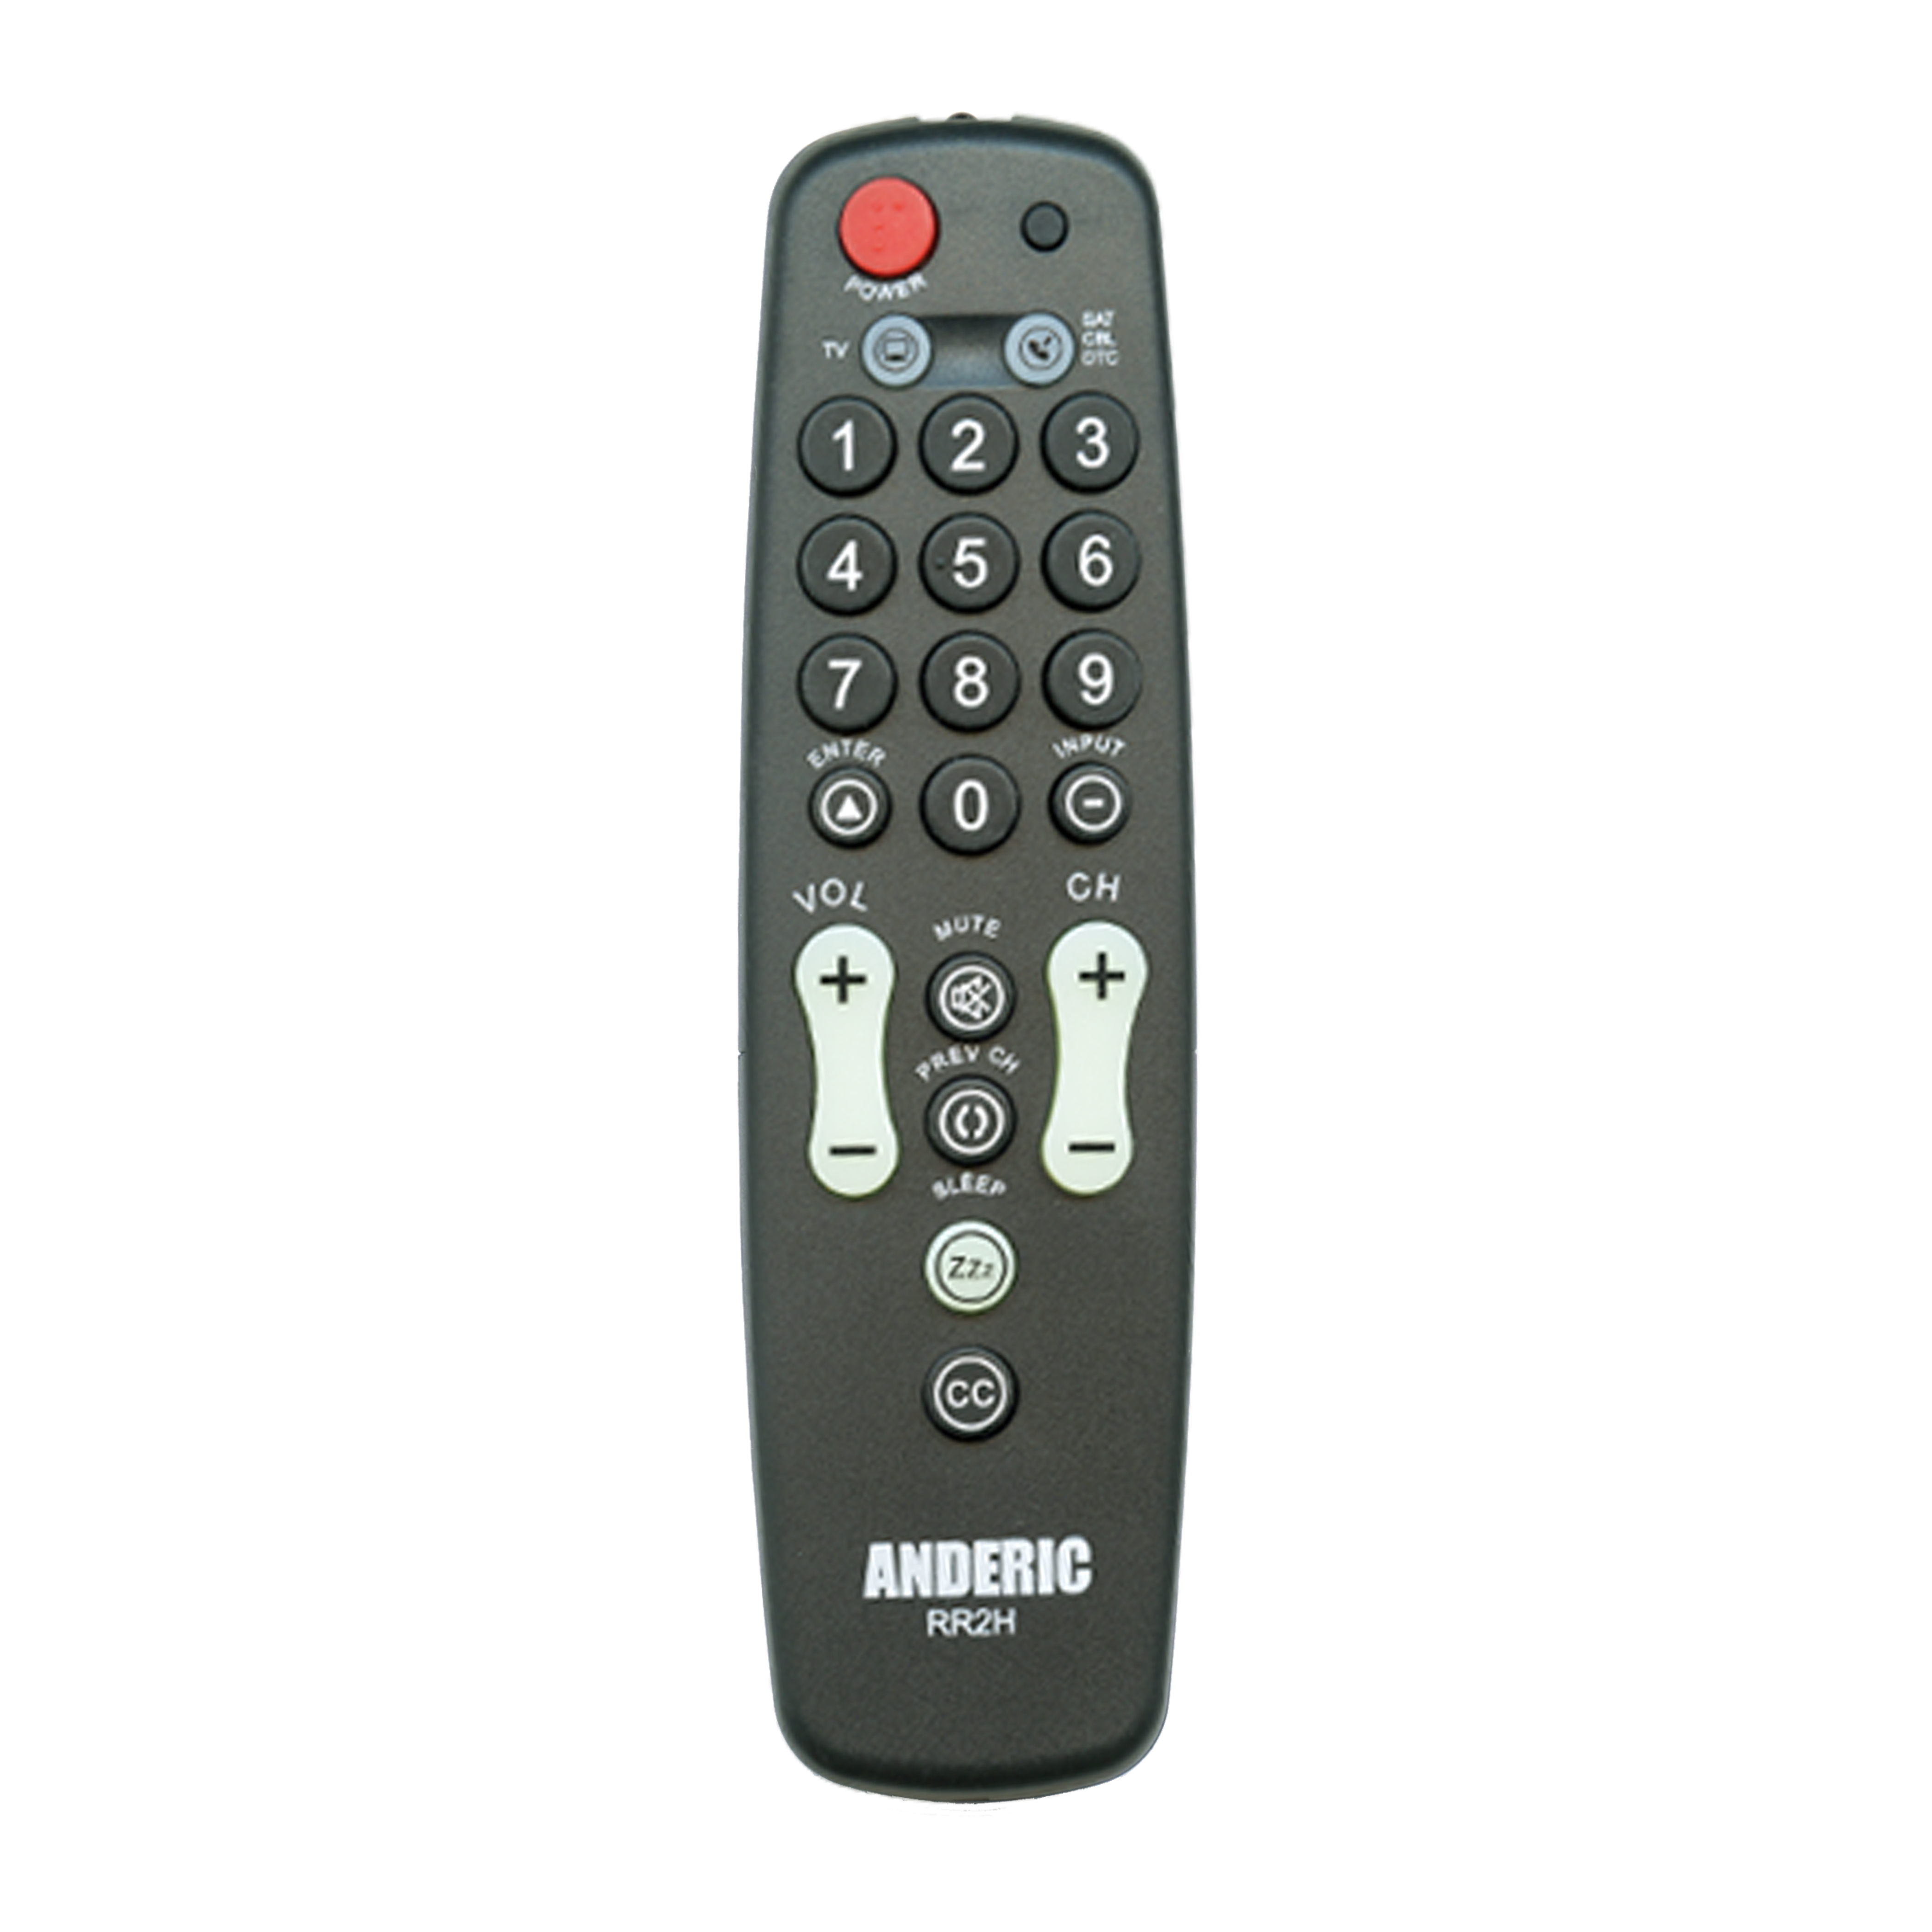 RR2H 2-Device Universal Remote Control for Hospitality TVs & In-Room Cable Boxes